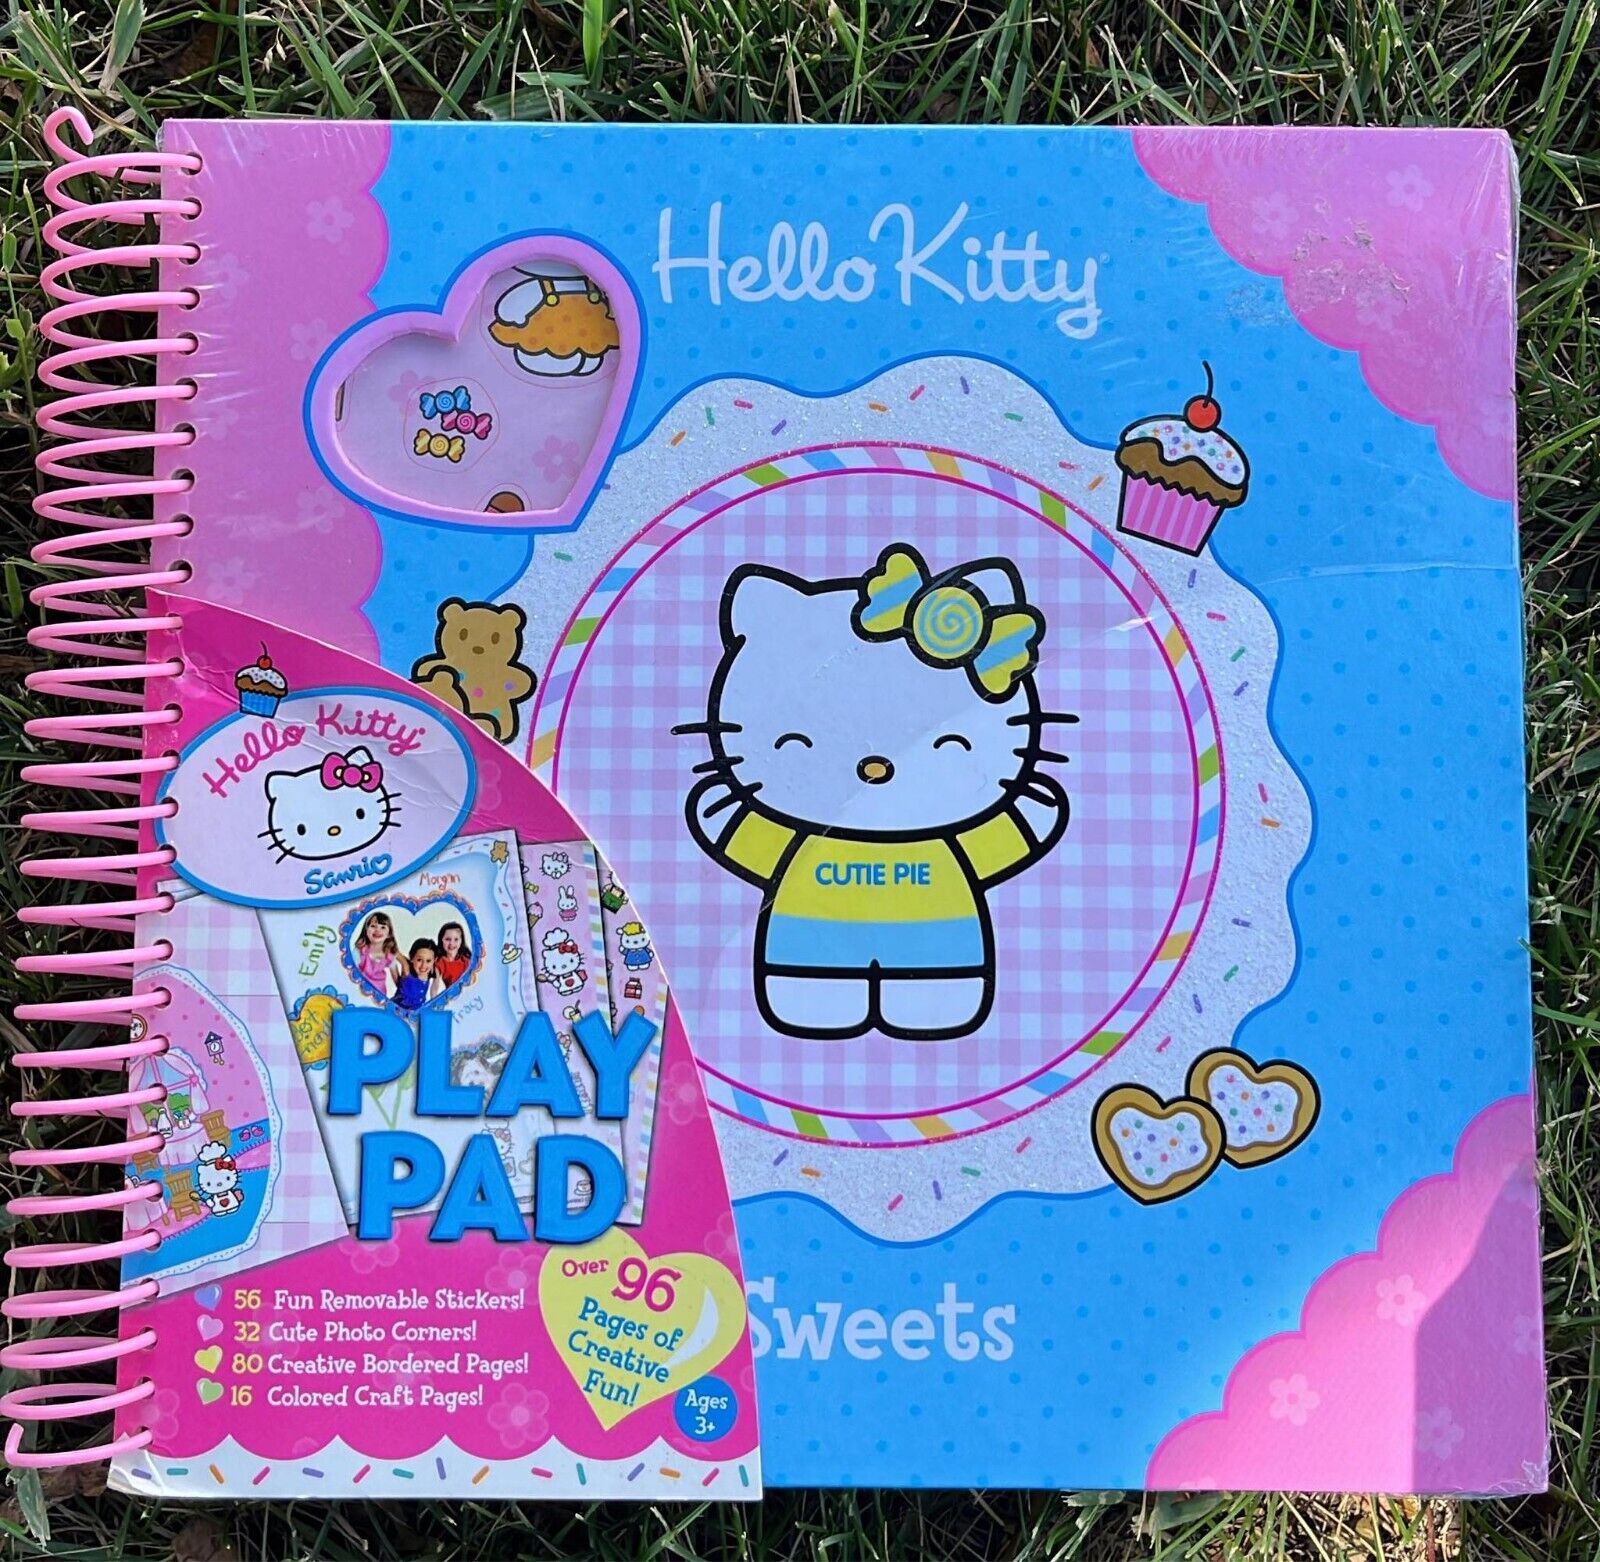 Vintage Sanrio 2004 Hello Kitty Notebook with stickers Playpad